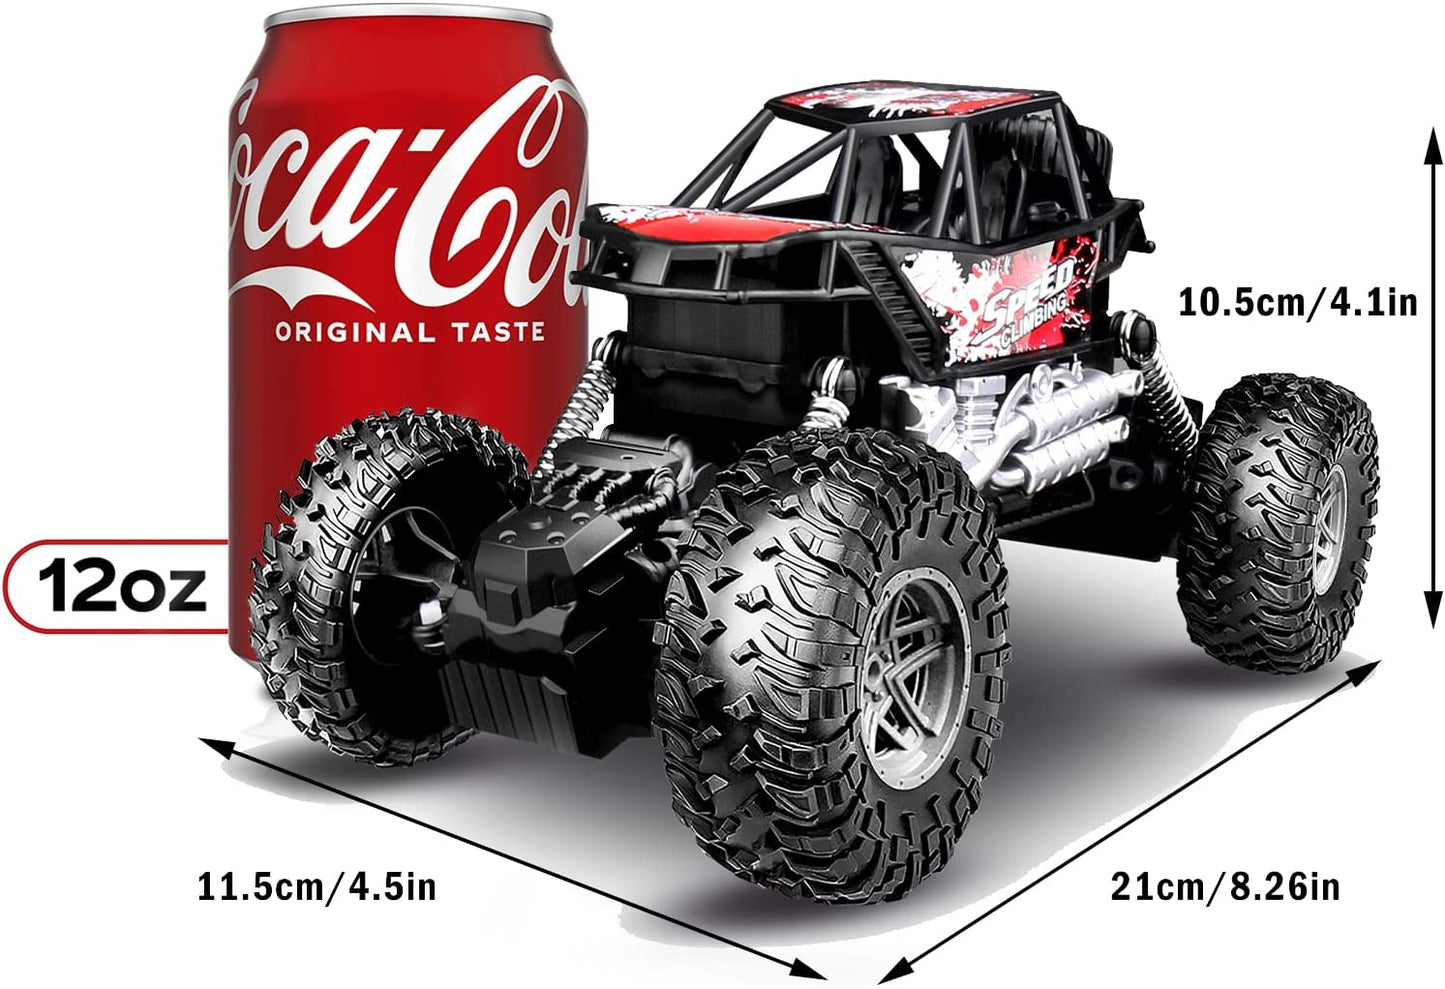 1:18 Scale All Terrains RC Monster Vehicle Truck Crawler, 4WD High Speed Electric Vehicle with Remote Control, off Road Truck with Two Rechargeable Batteries for Boys Kids and Adults(Red)